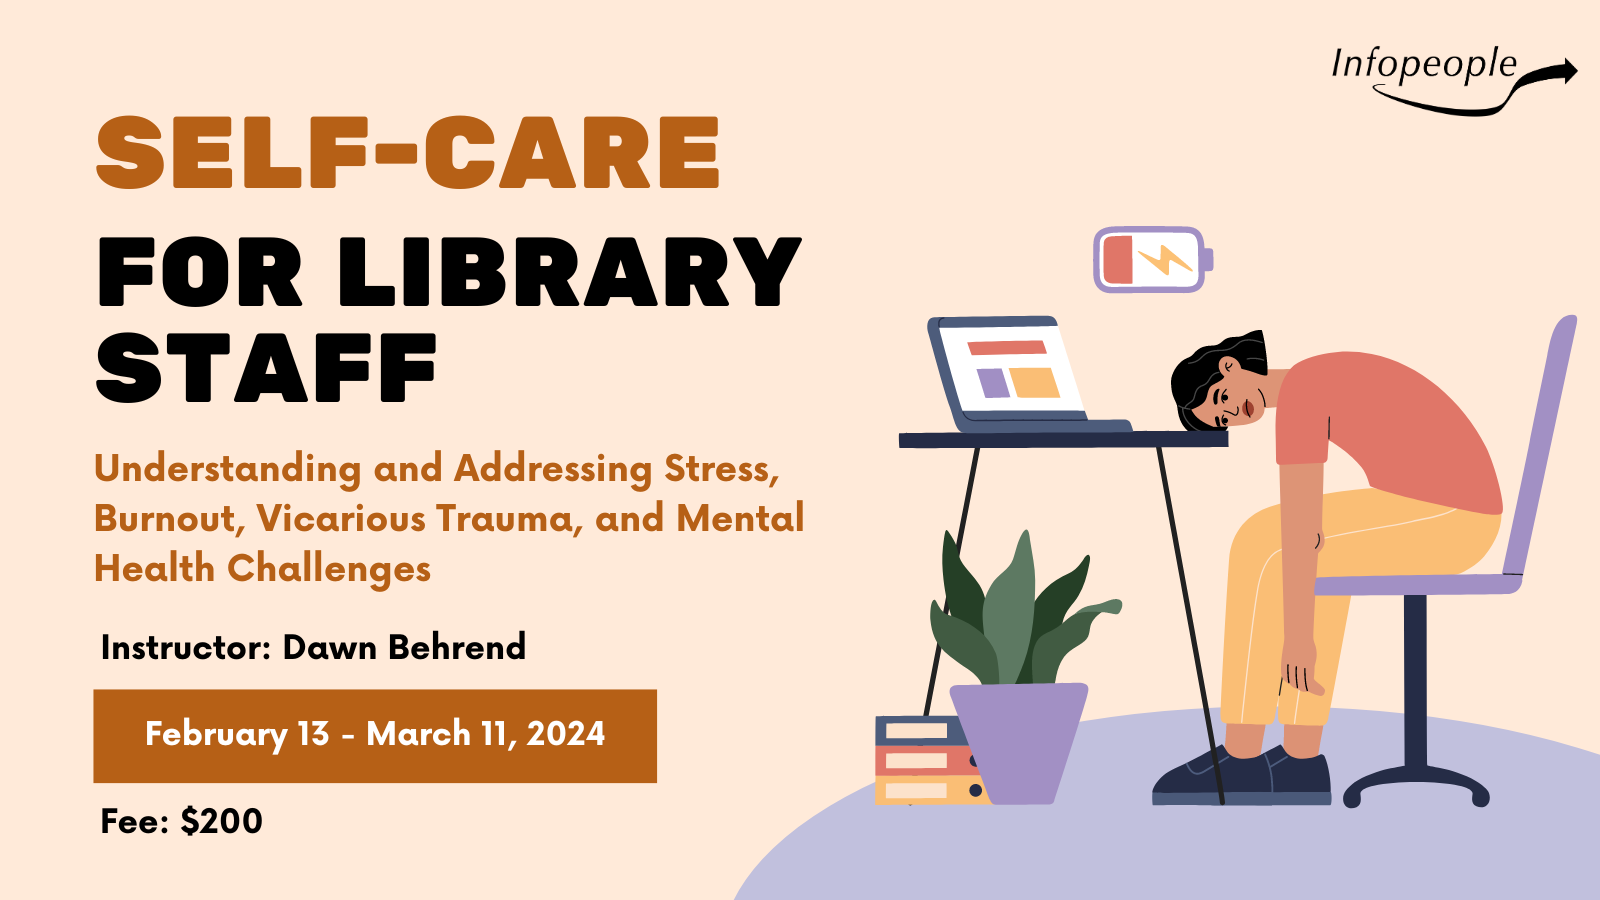 Self-Care for Library Staff: Understanding and addressing stress, burnout, vicarious trauma, and mental health challenges. An Infopeople course. Instructor: Dawn Behrend. February 13 to March 11, 2024. Fee: $200. A person working with their head on their desk and a hopeless expression as a battery above their head warns it is low.